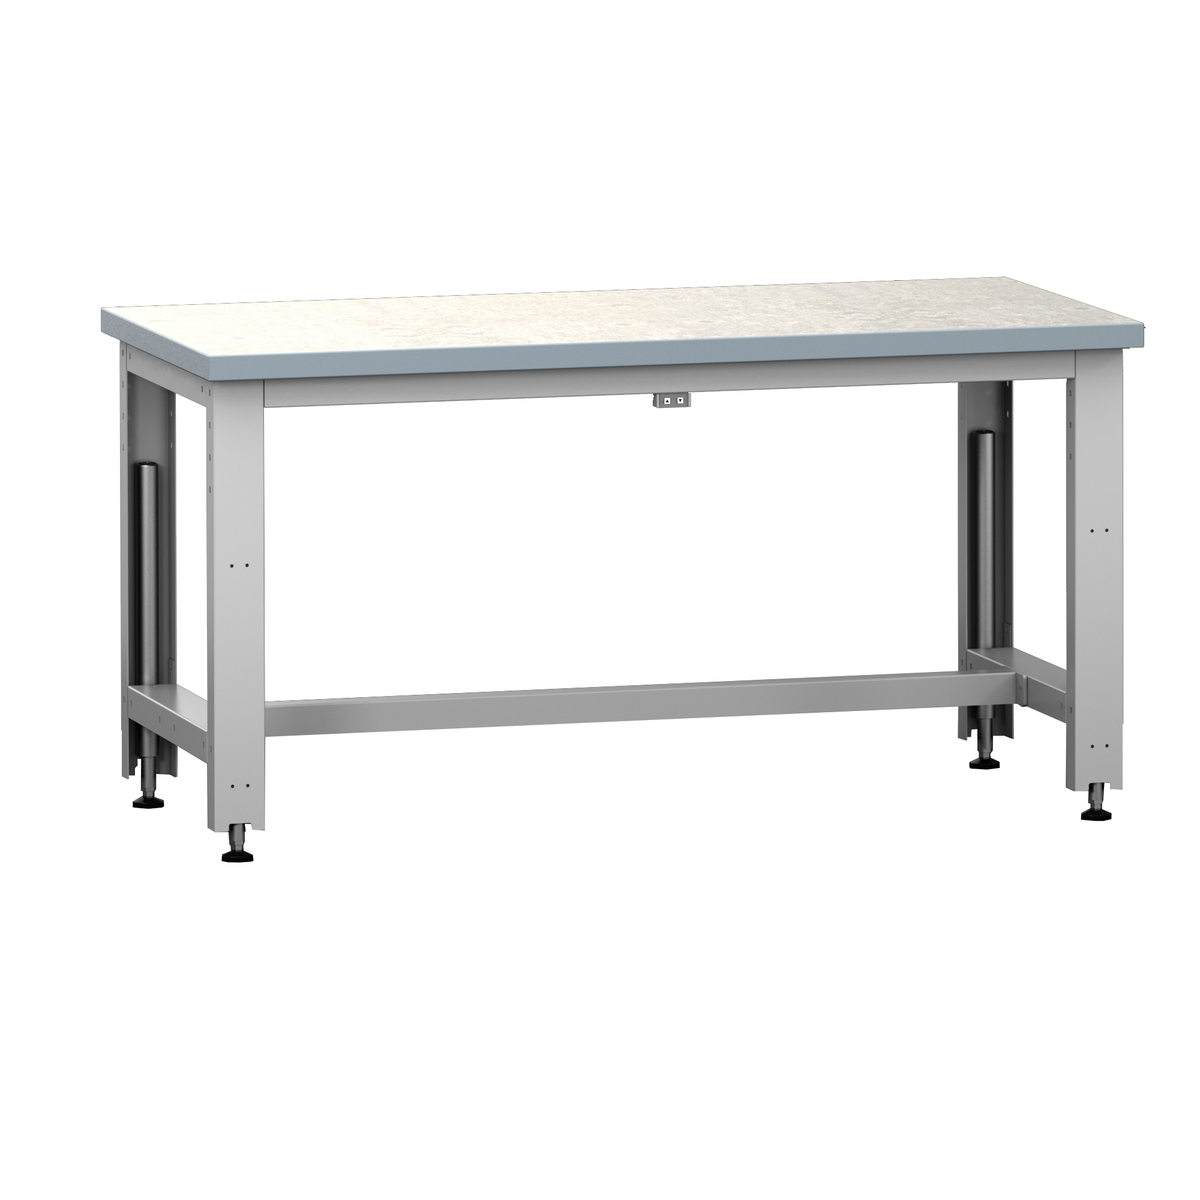 41003581.16 - cubio stepless adjustable height bench